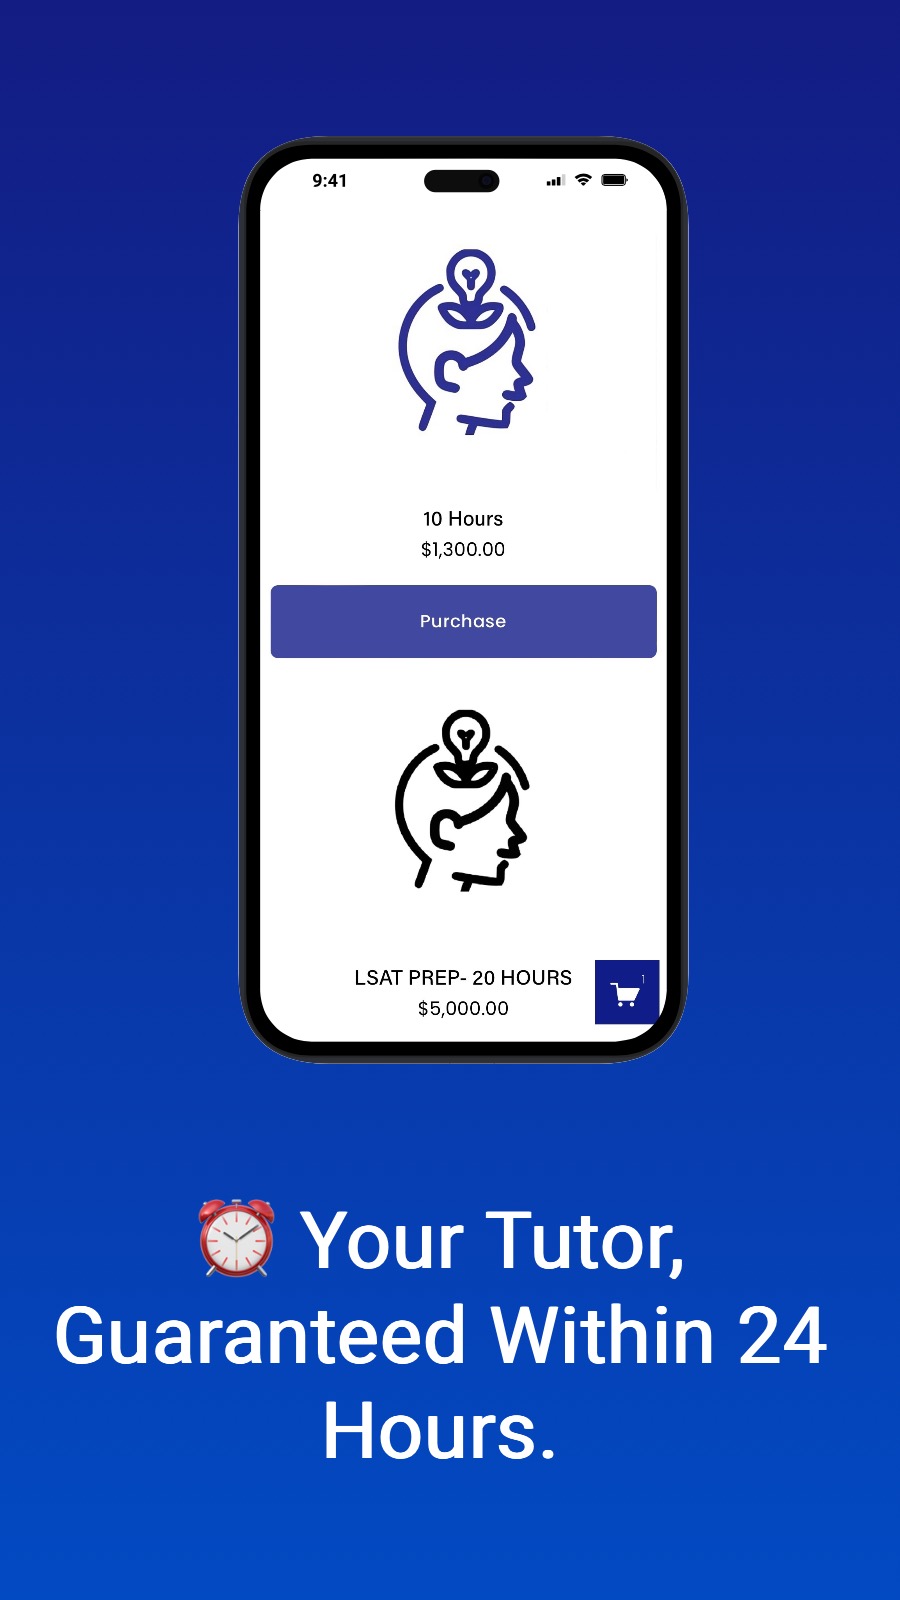 ⏰ Your Tutor, Guaranteed Within 24 Hours.